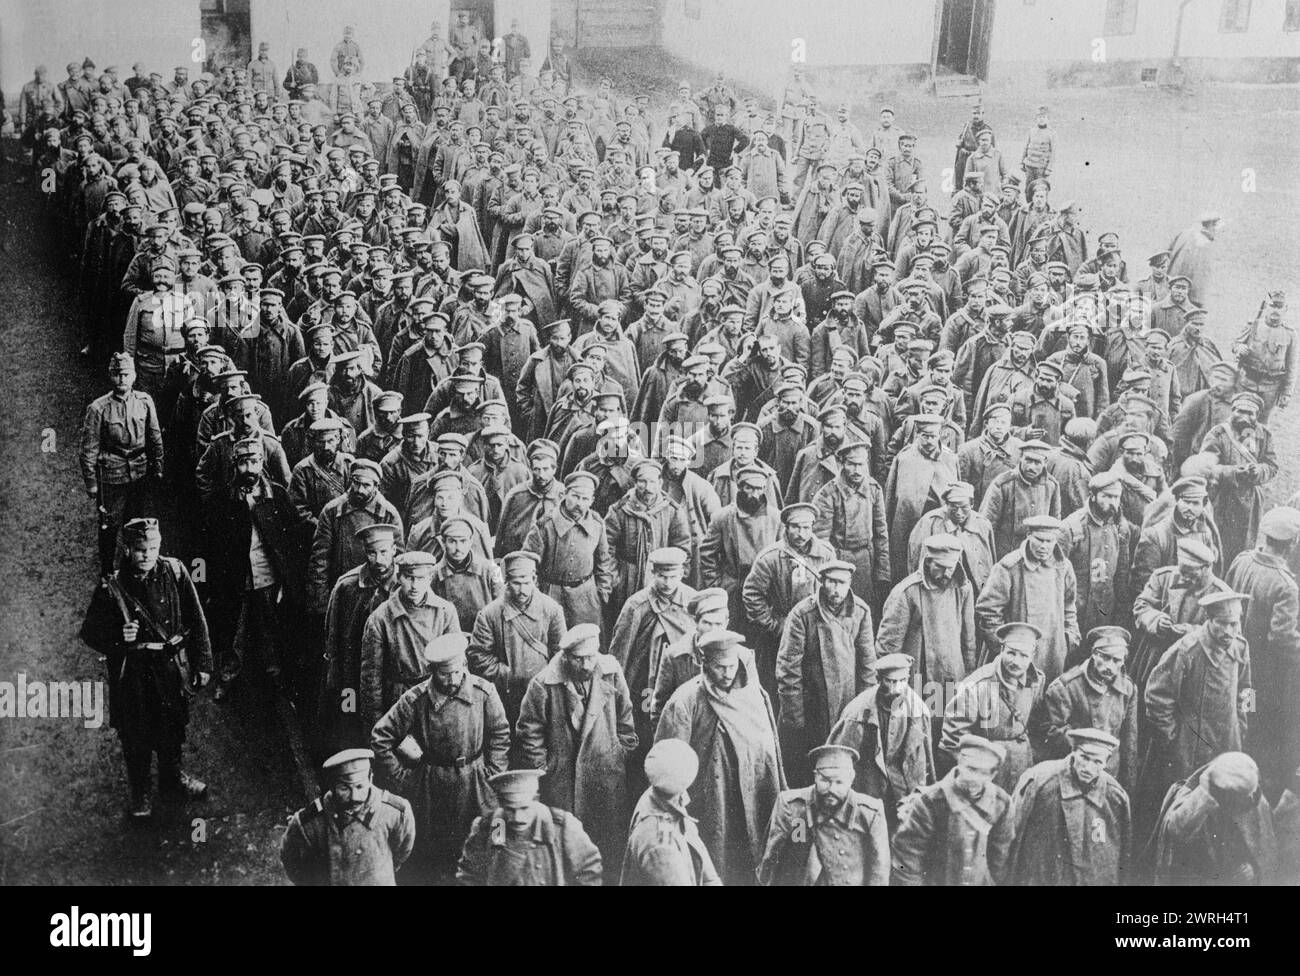 Russian prisoners in Przemysl, between c1914 and c1915. Russian soldiers taken prisoner by the Austro-Hungarian army at Przemysl Fortress, Przemysl, Austro-Hungarian Empire (now in Poland) during World War I. Stock Photo